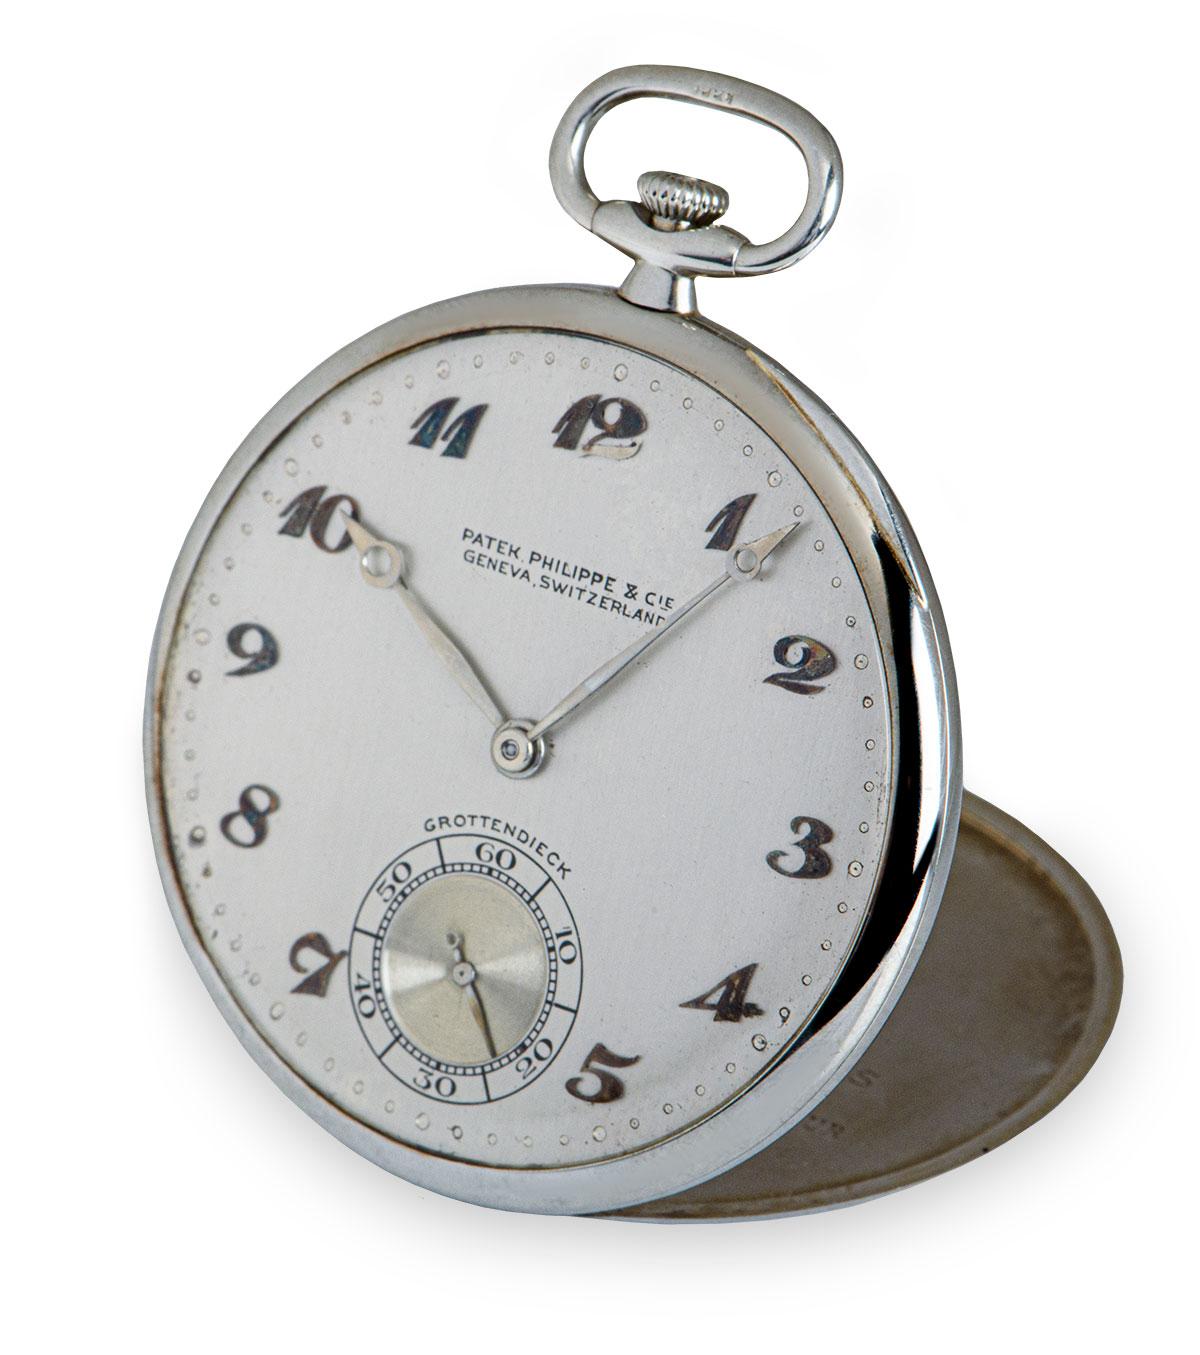 A 43 mm 18k White Gold Open Face Bassine Style Double Name Grottendieck Vintage Gents Pocket Watch, silvered dial with applied Breguet numerals, small seconds at 6 0'clock, a fixed 18k white gold bezel, plastic glass, manual wind movement, in